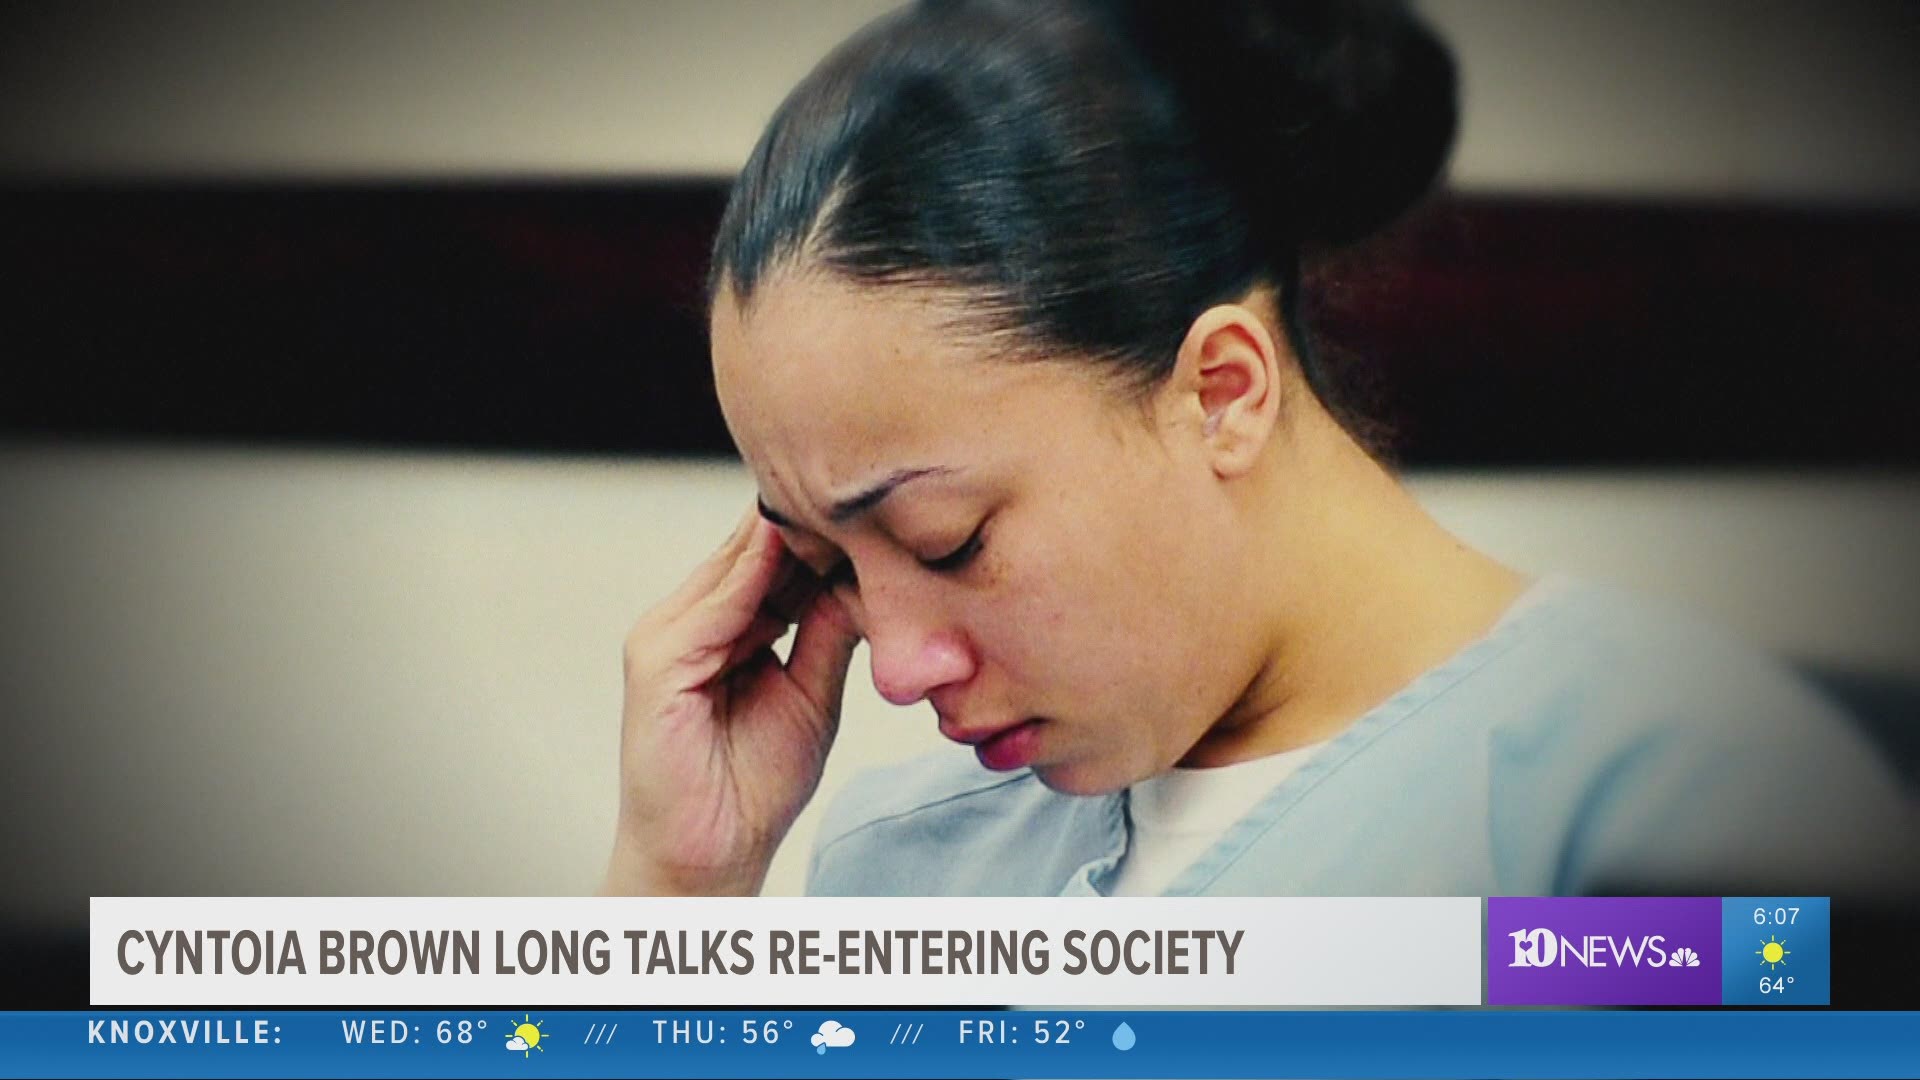 Cyntoia Brown Long was a victim of sex trafficking when she was 16, when she killed a man who solicited her for sex. She spent years in prison before being released.